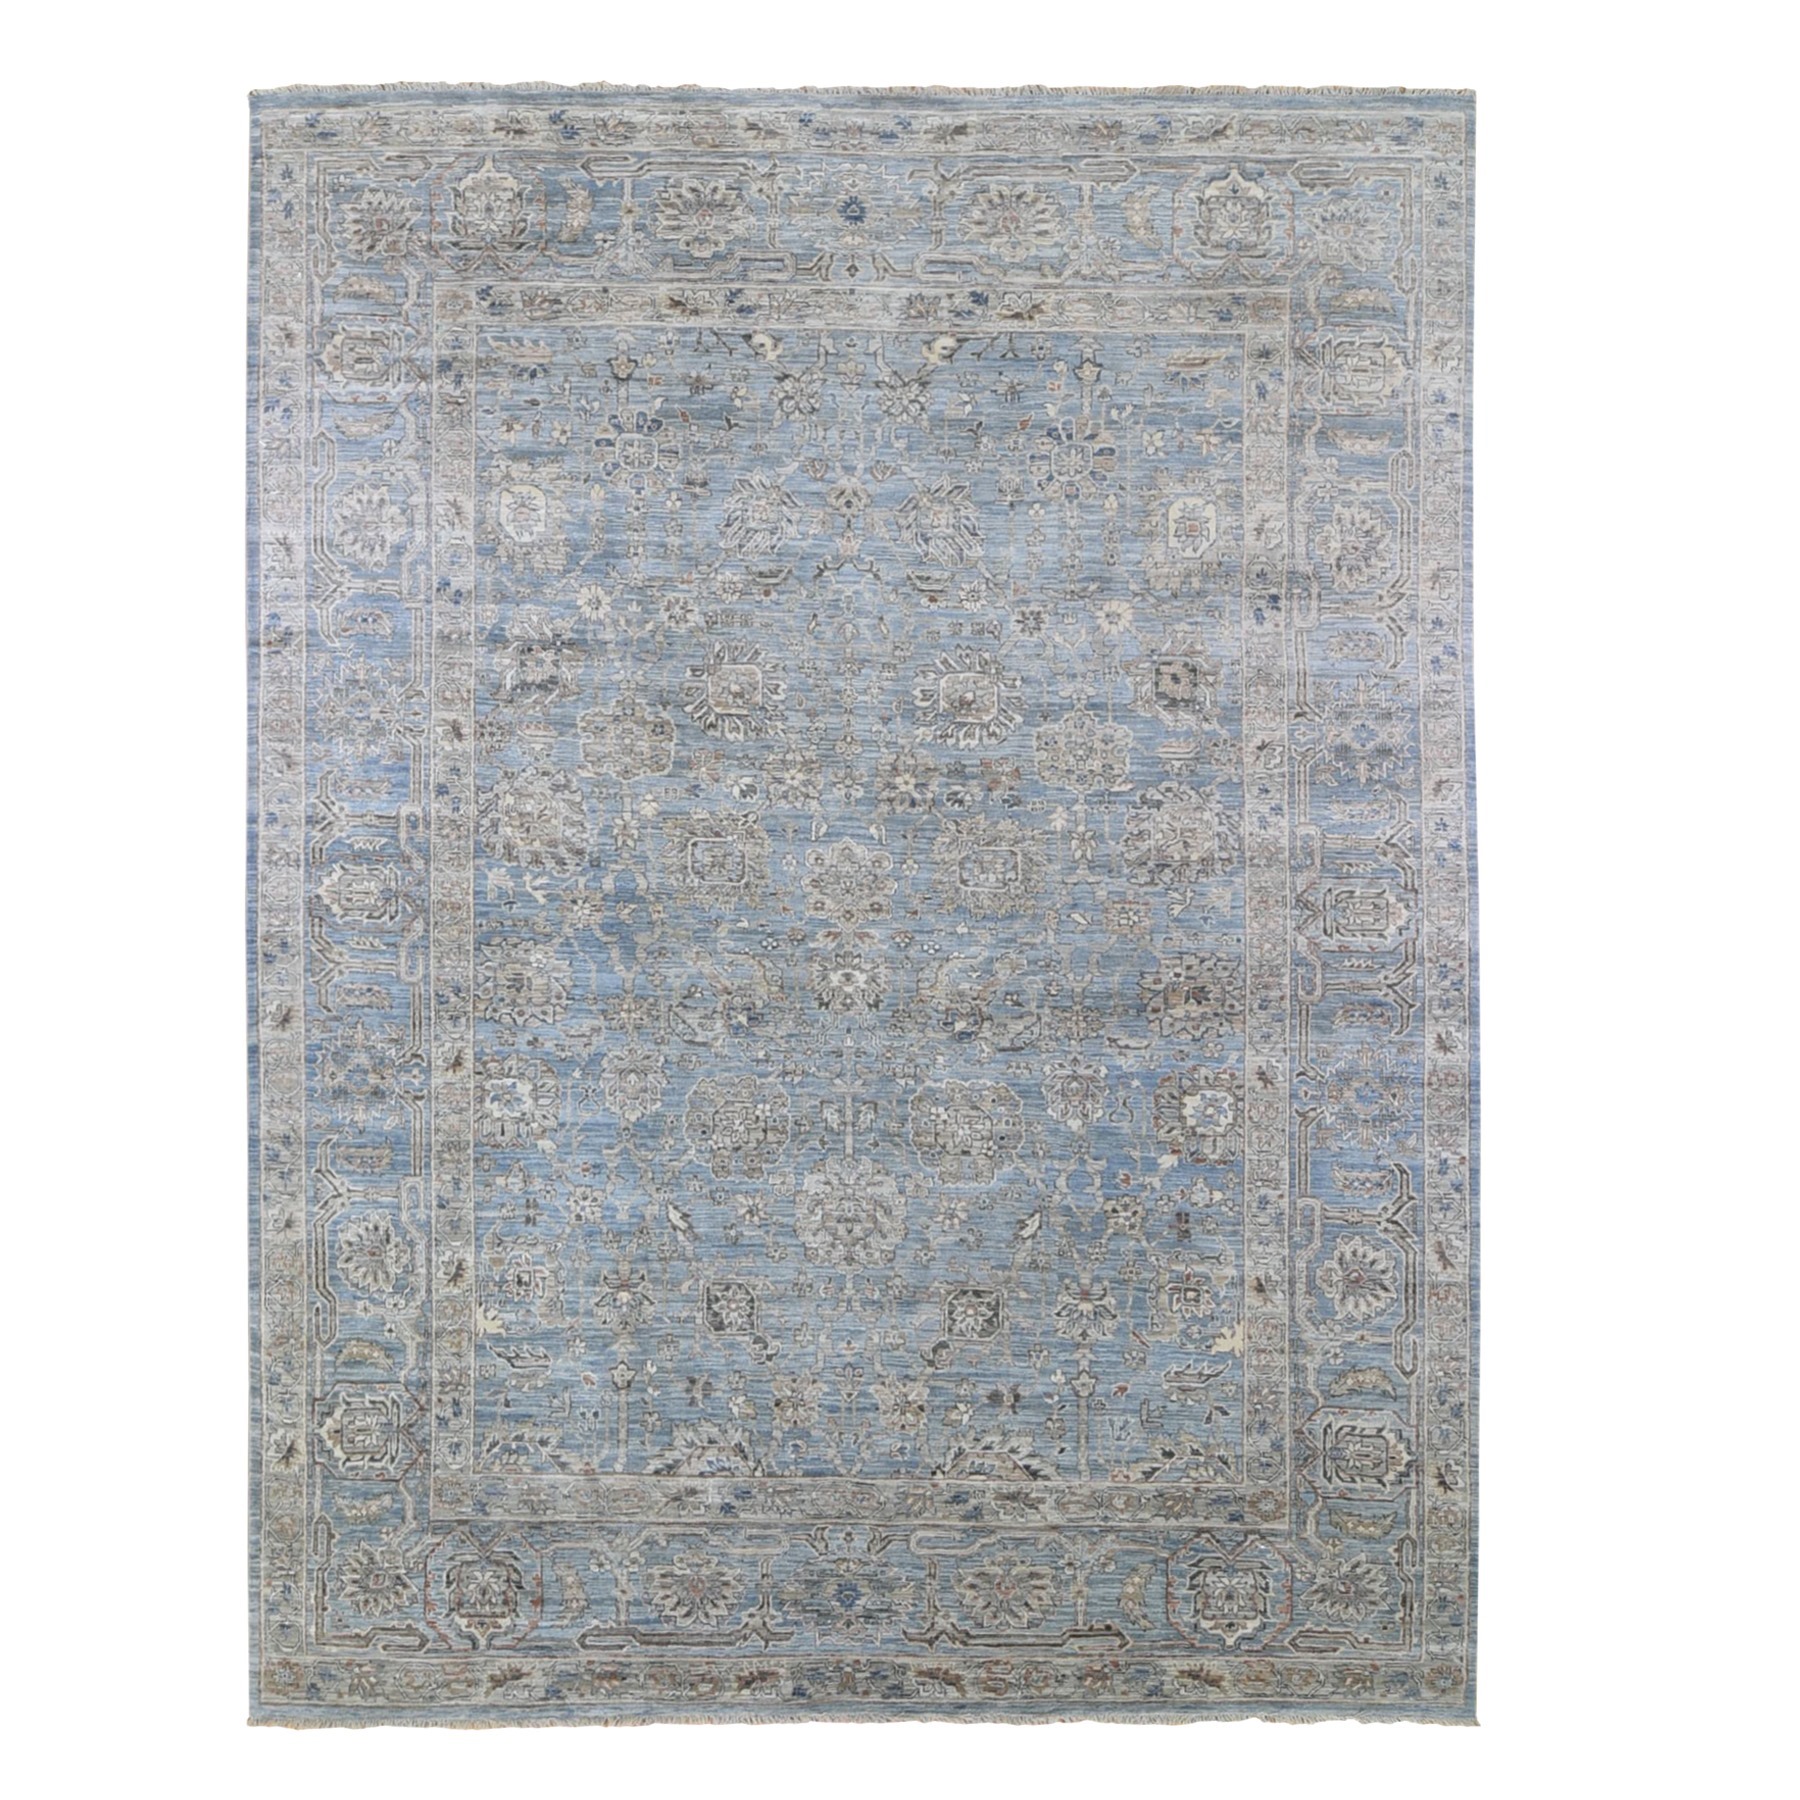 Agra And Turkish Collection Hand Knotted Blue Rug No: 1132956